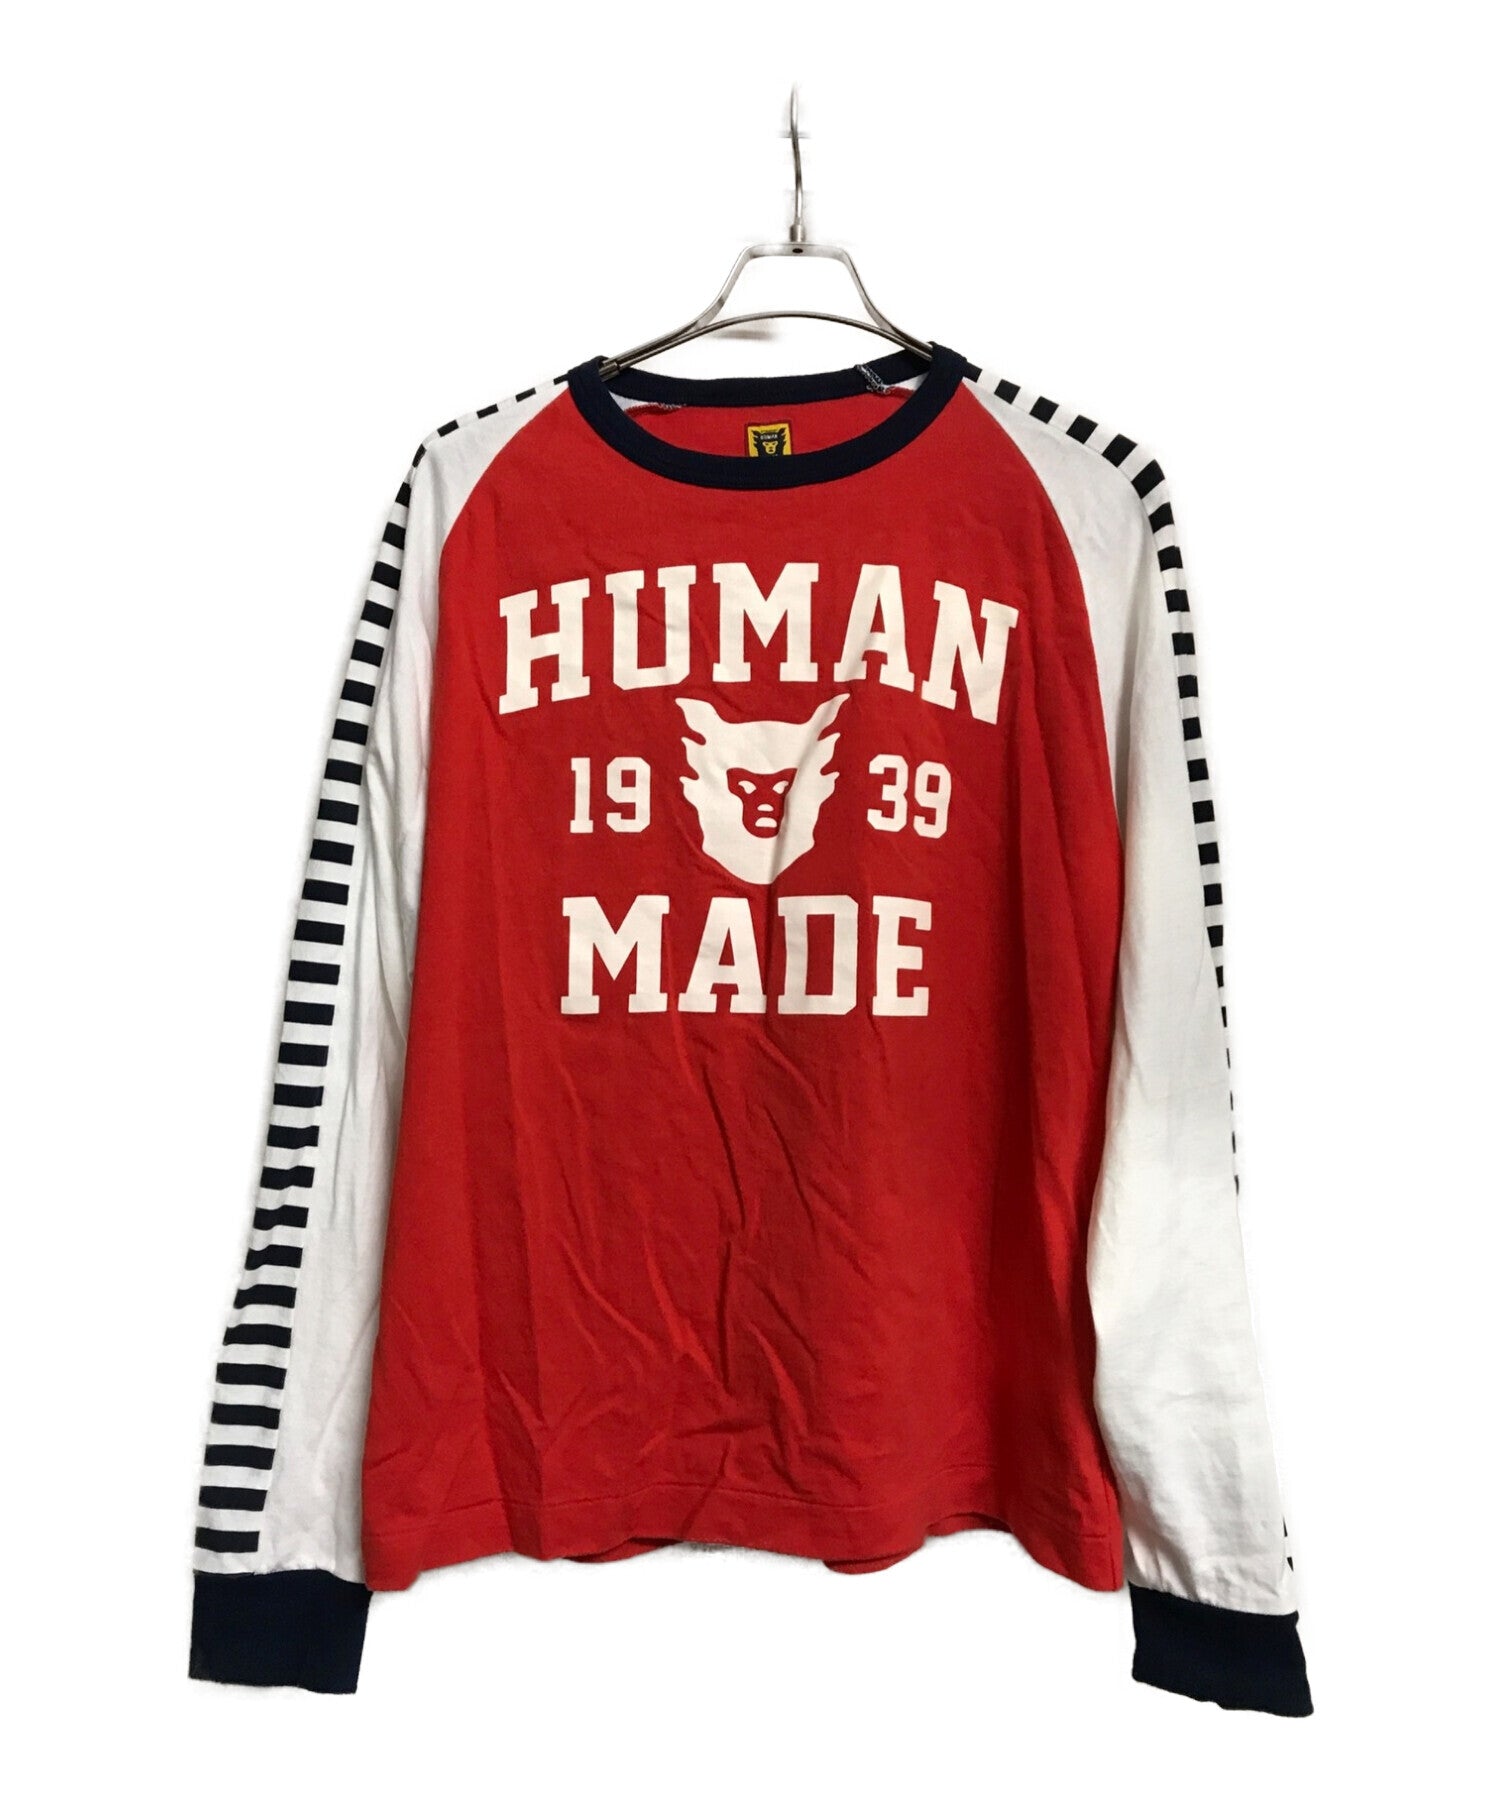 Shop HUMAN MADE at Archive Factory